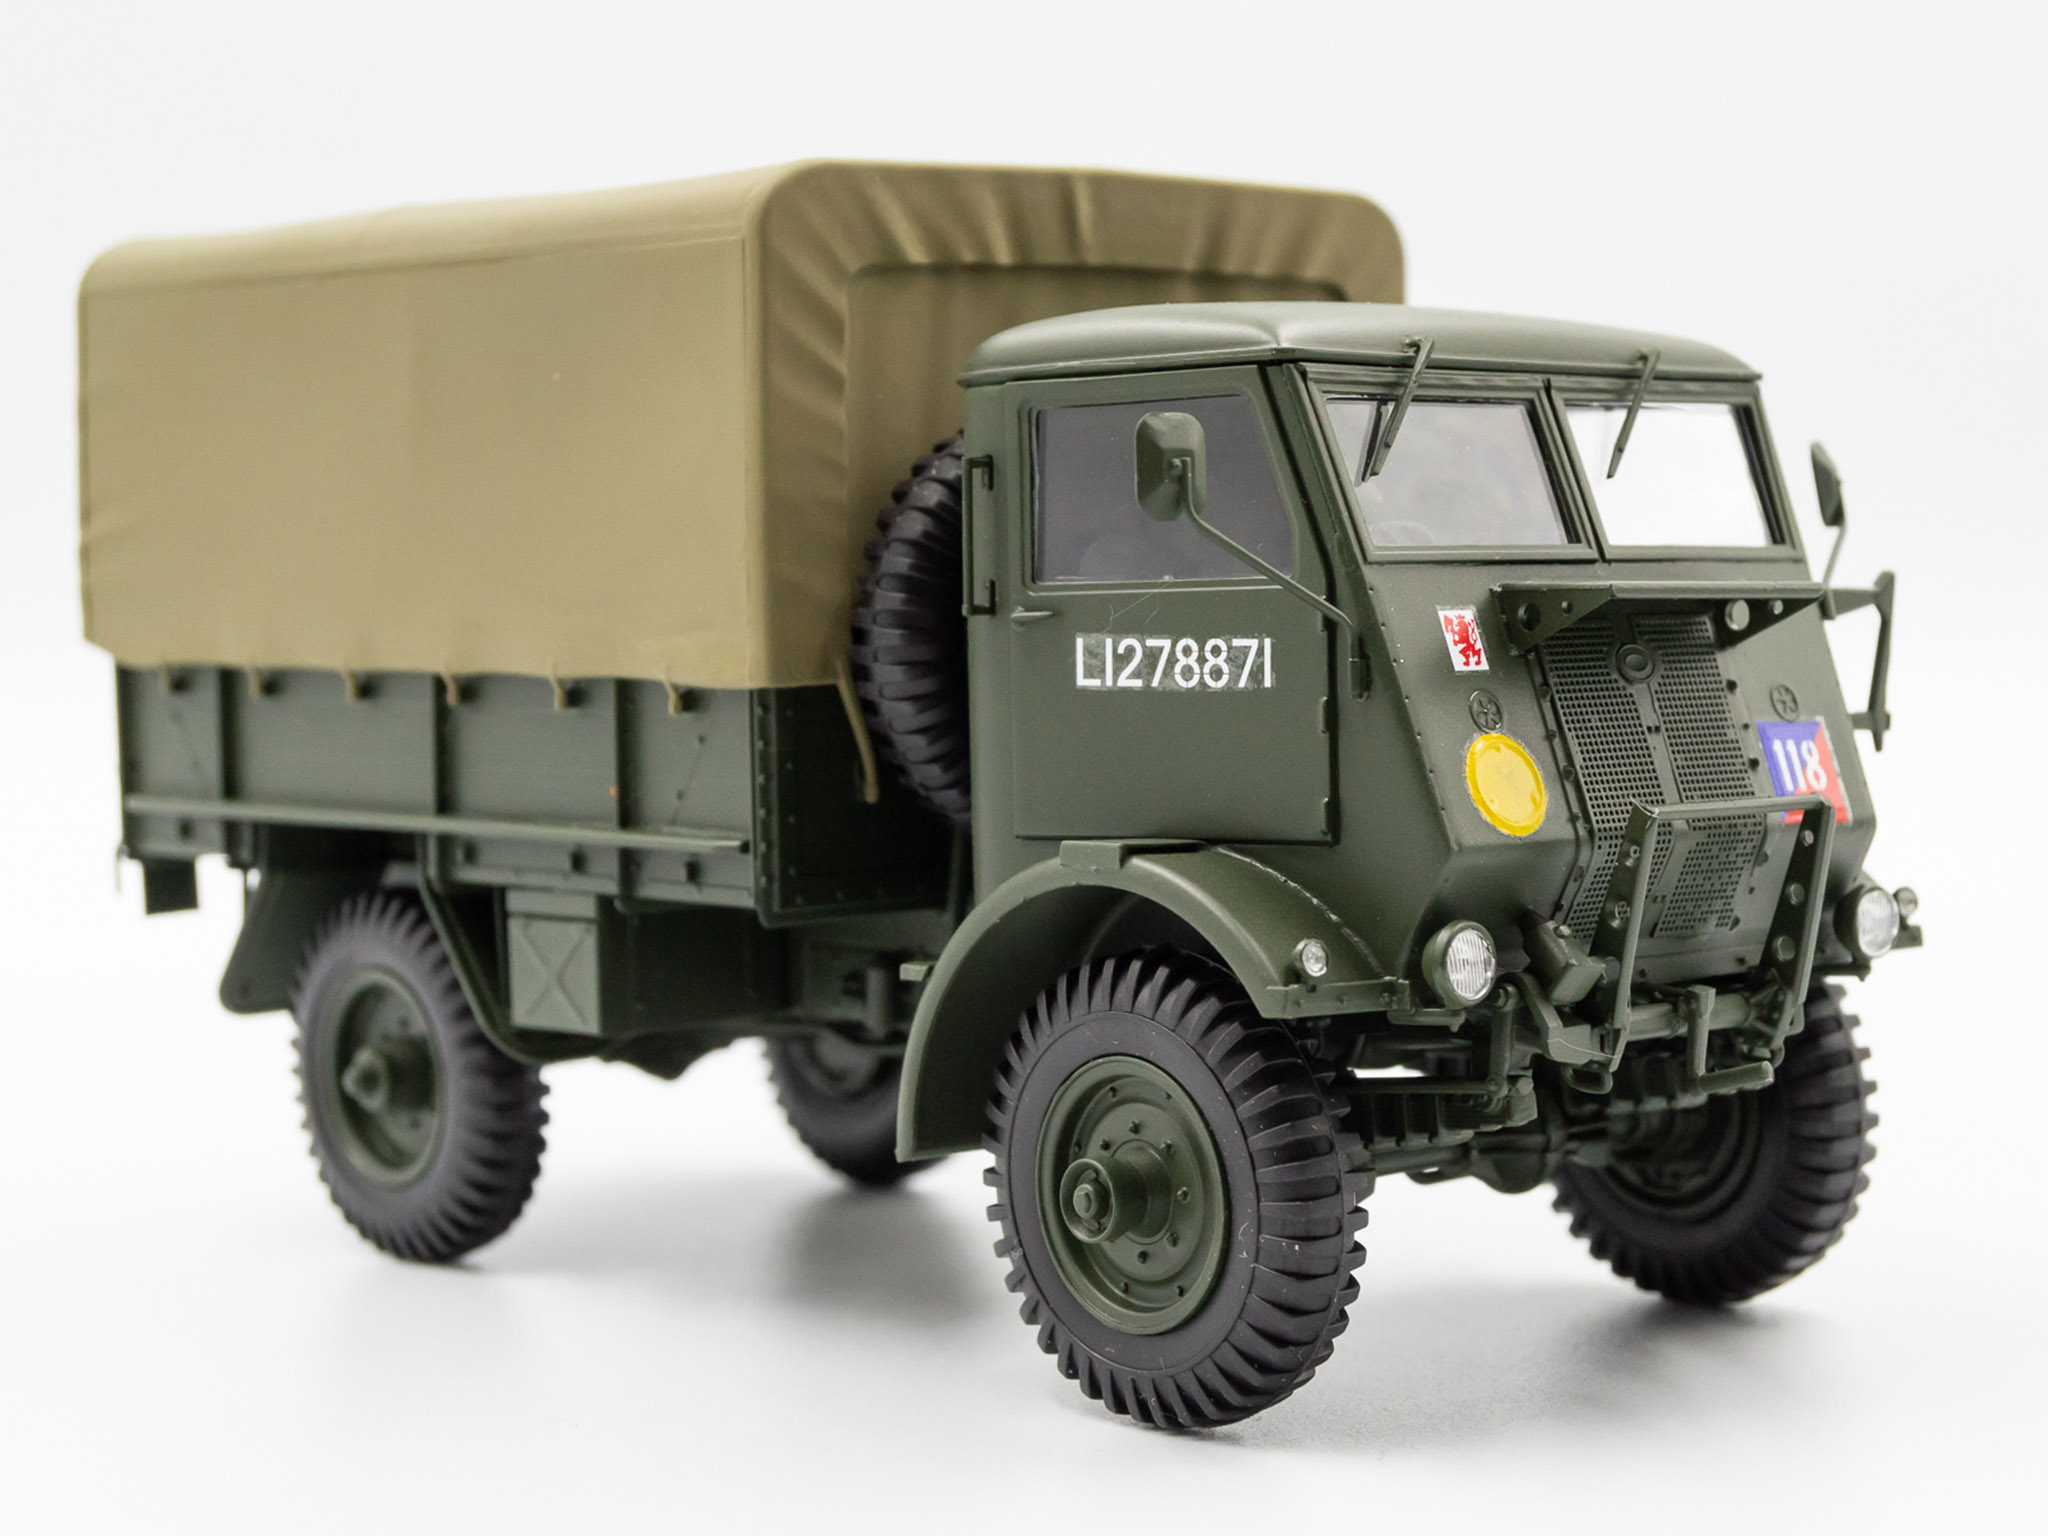 8 WWII British truck 1/35 scale photo-etched Details about   Vmodels 35043 Set model W.O.T 